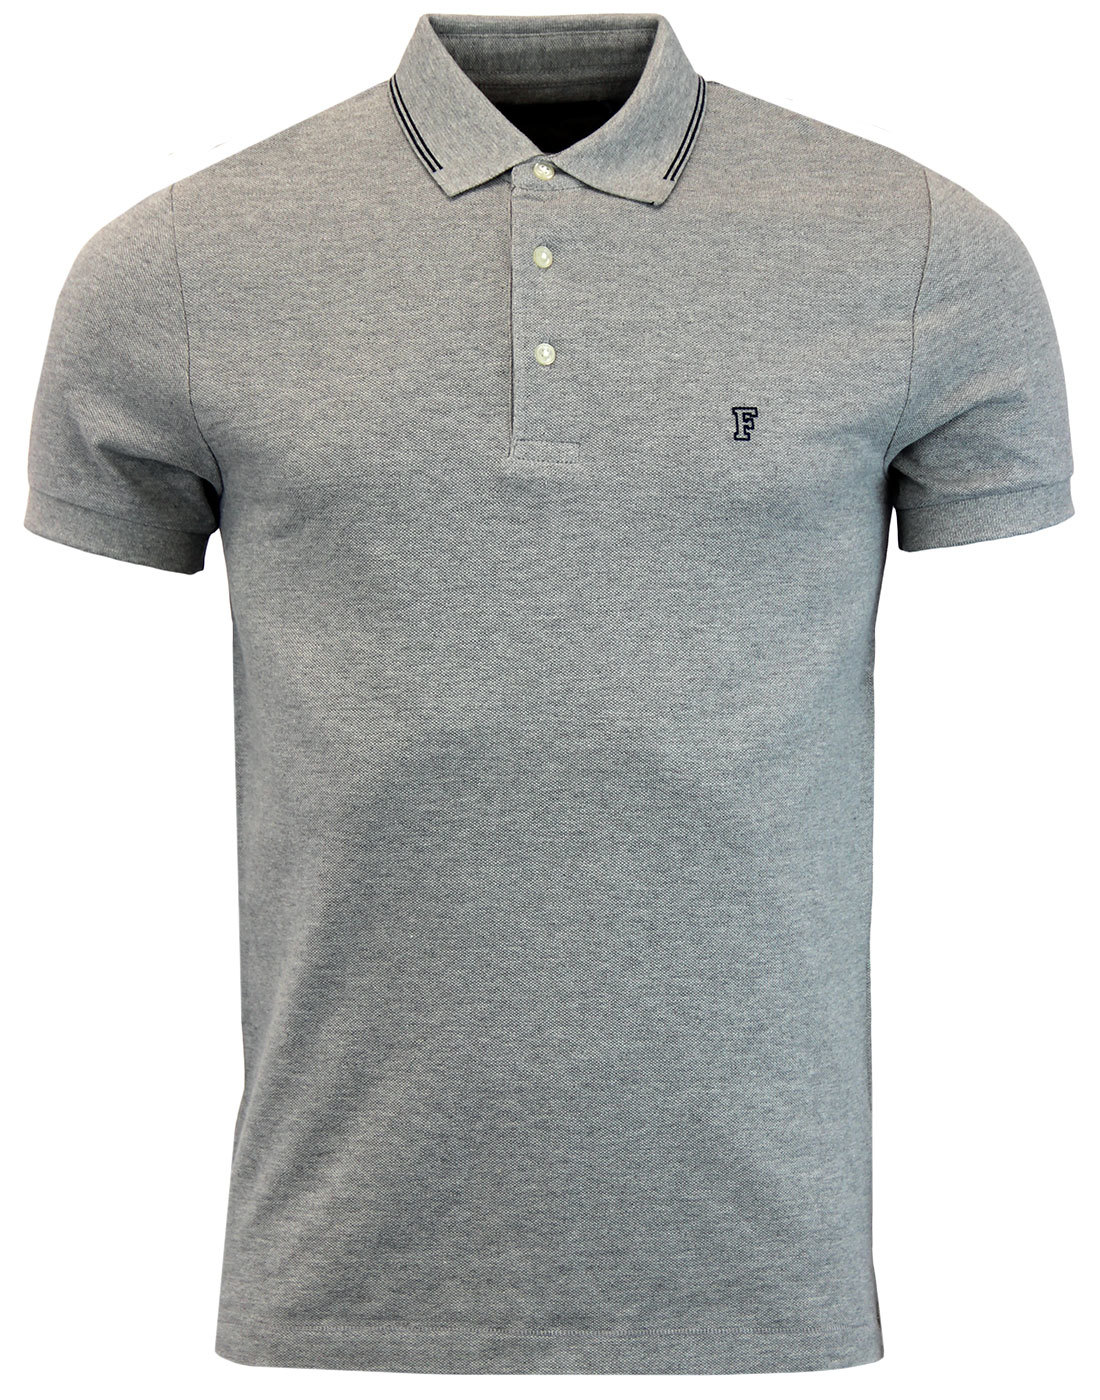 FRENCH CONNECTION Retro Mod Twin Tipped SS Pique Polo Shirt Grey